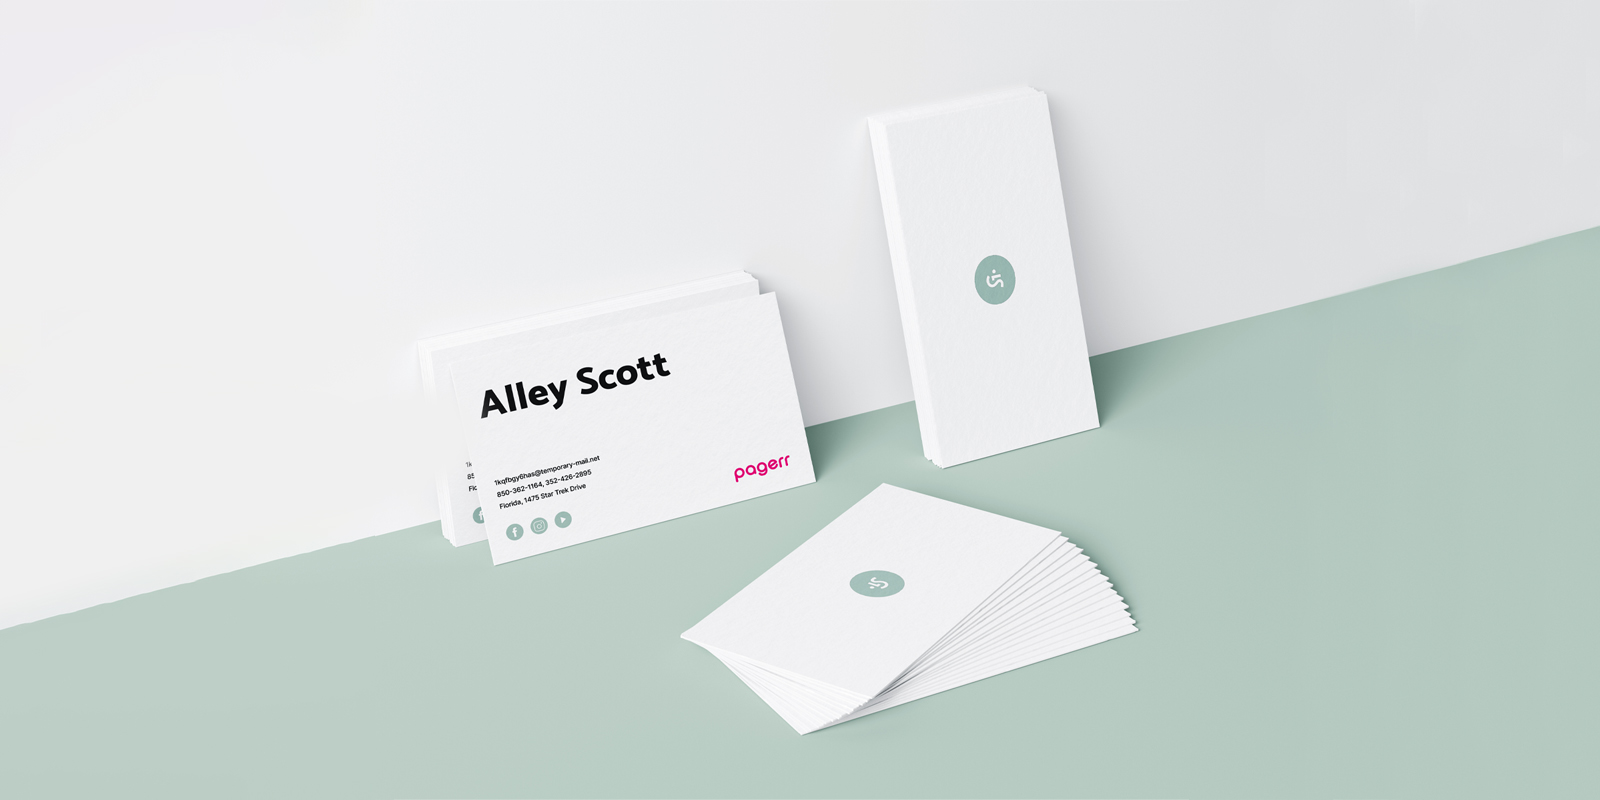 Business cards in Valencia - Print with Pagerr